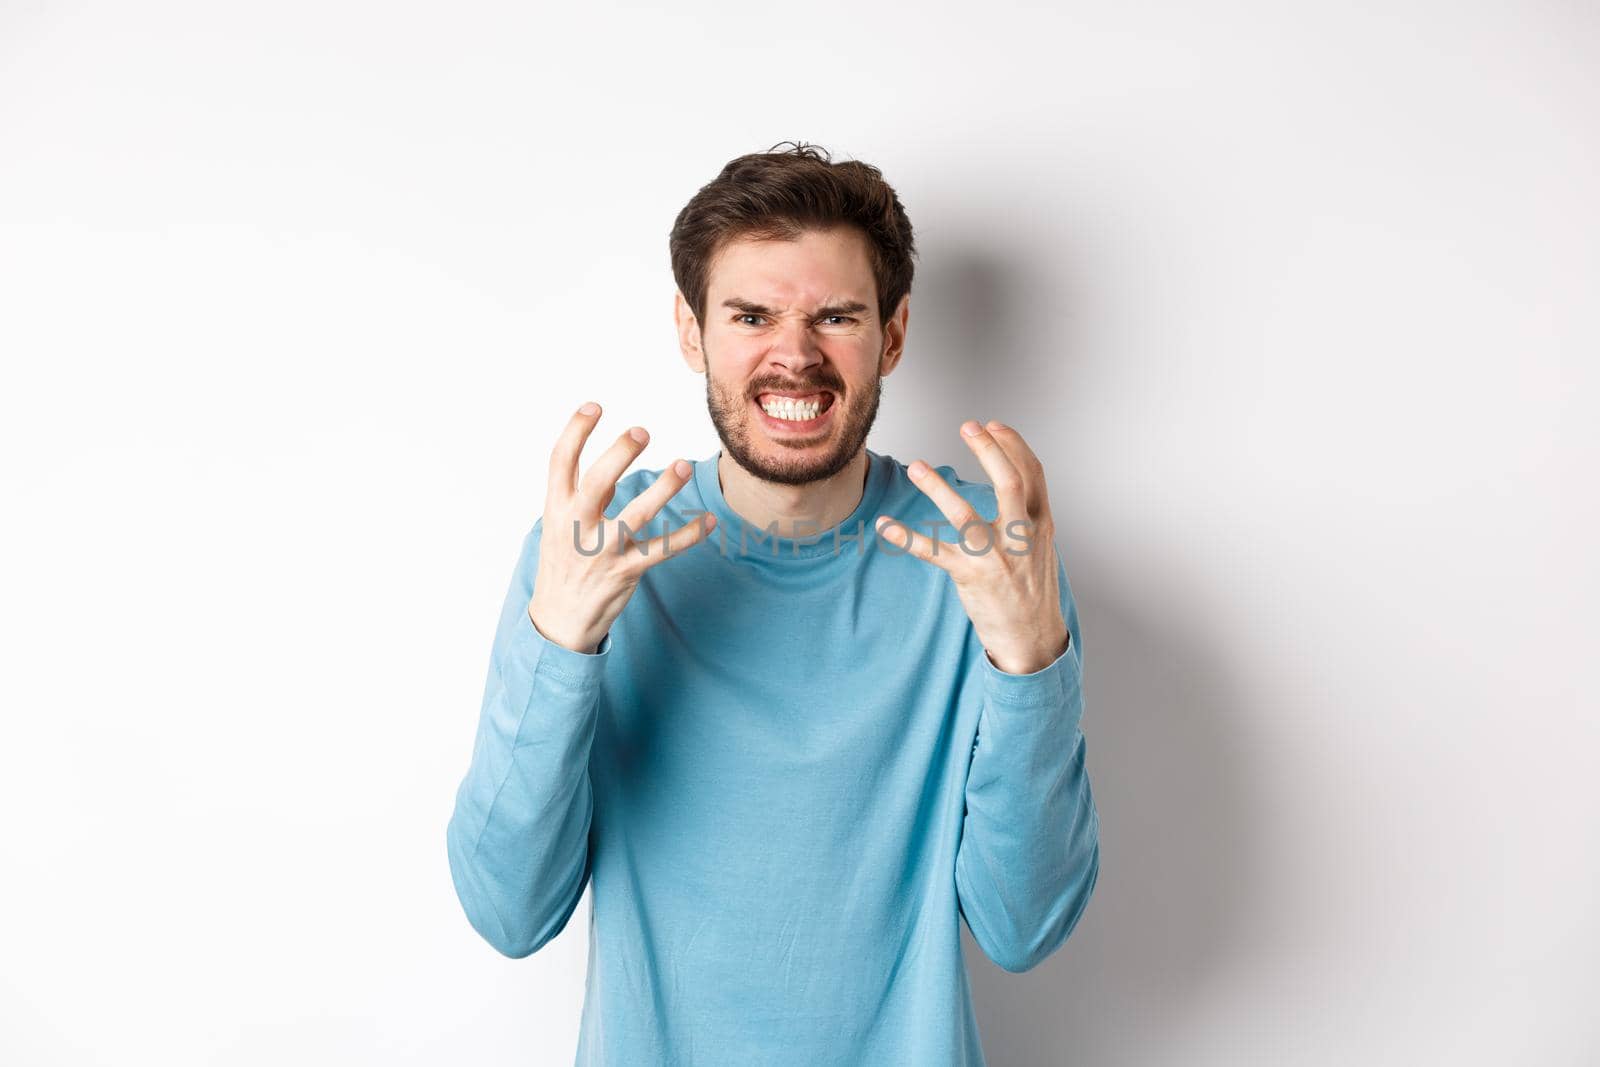 Angry caucasian man shaking hands and grimacing, looking with mad face, express hatred against white background. Copy space